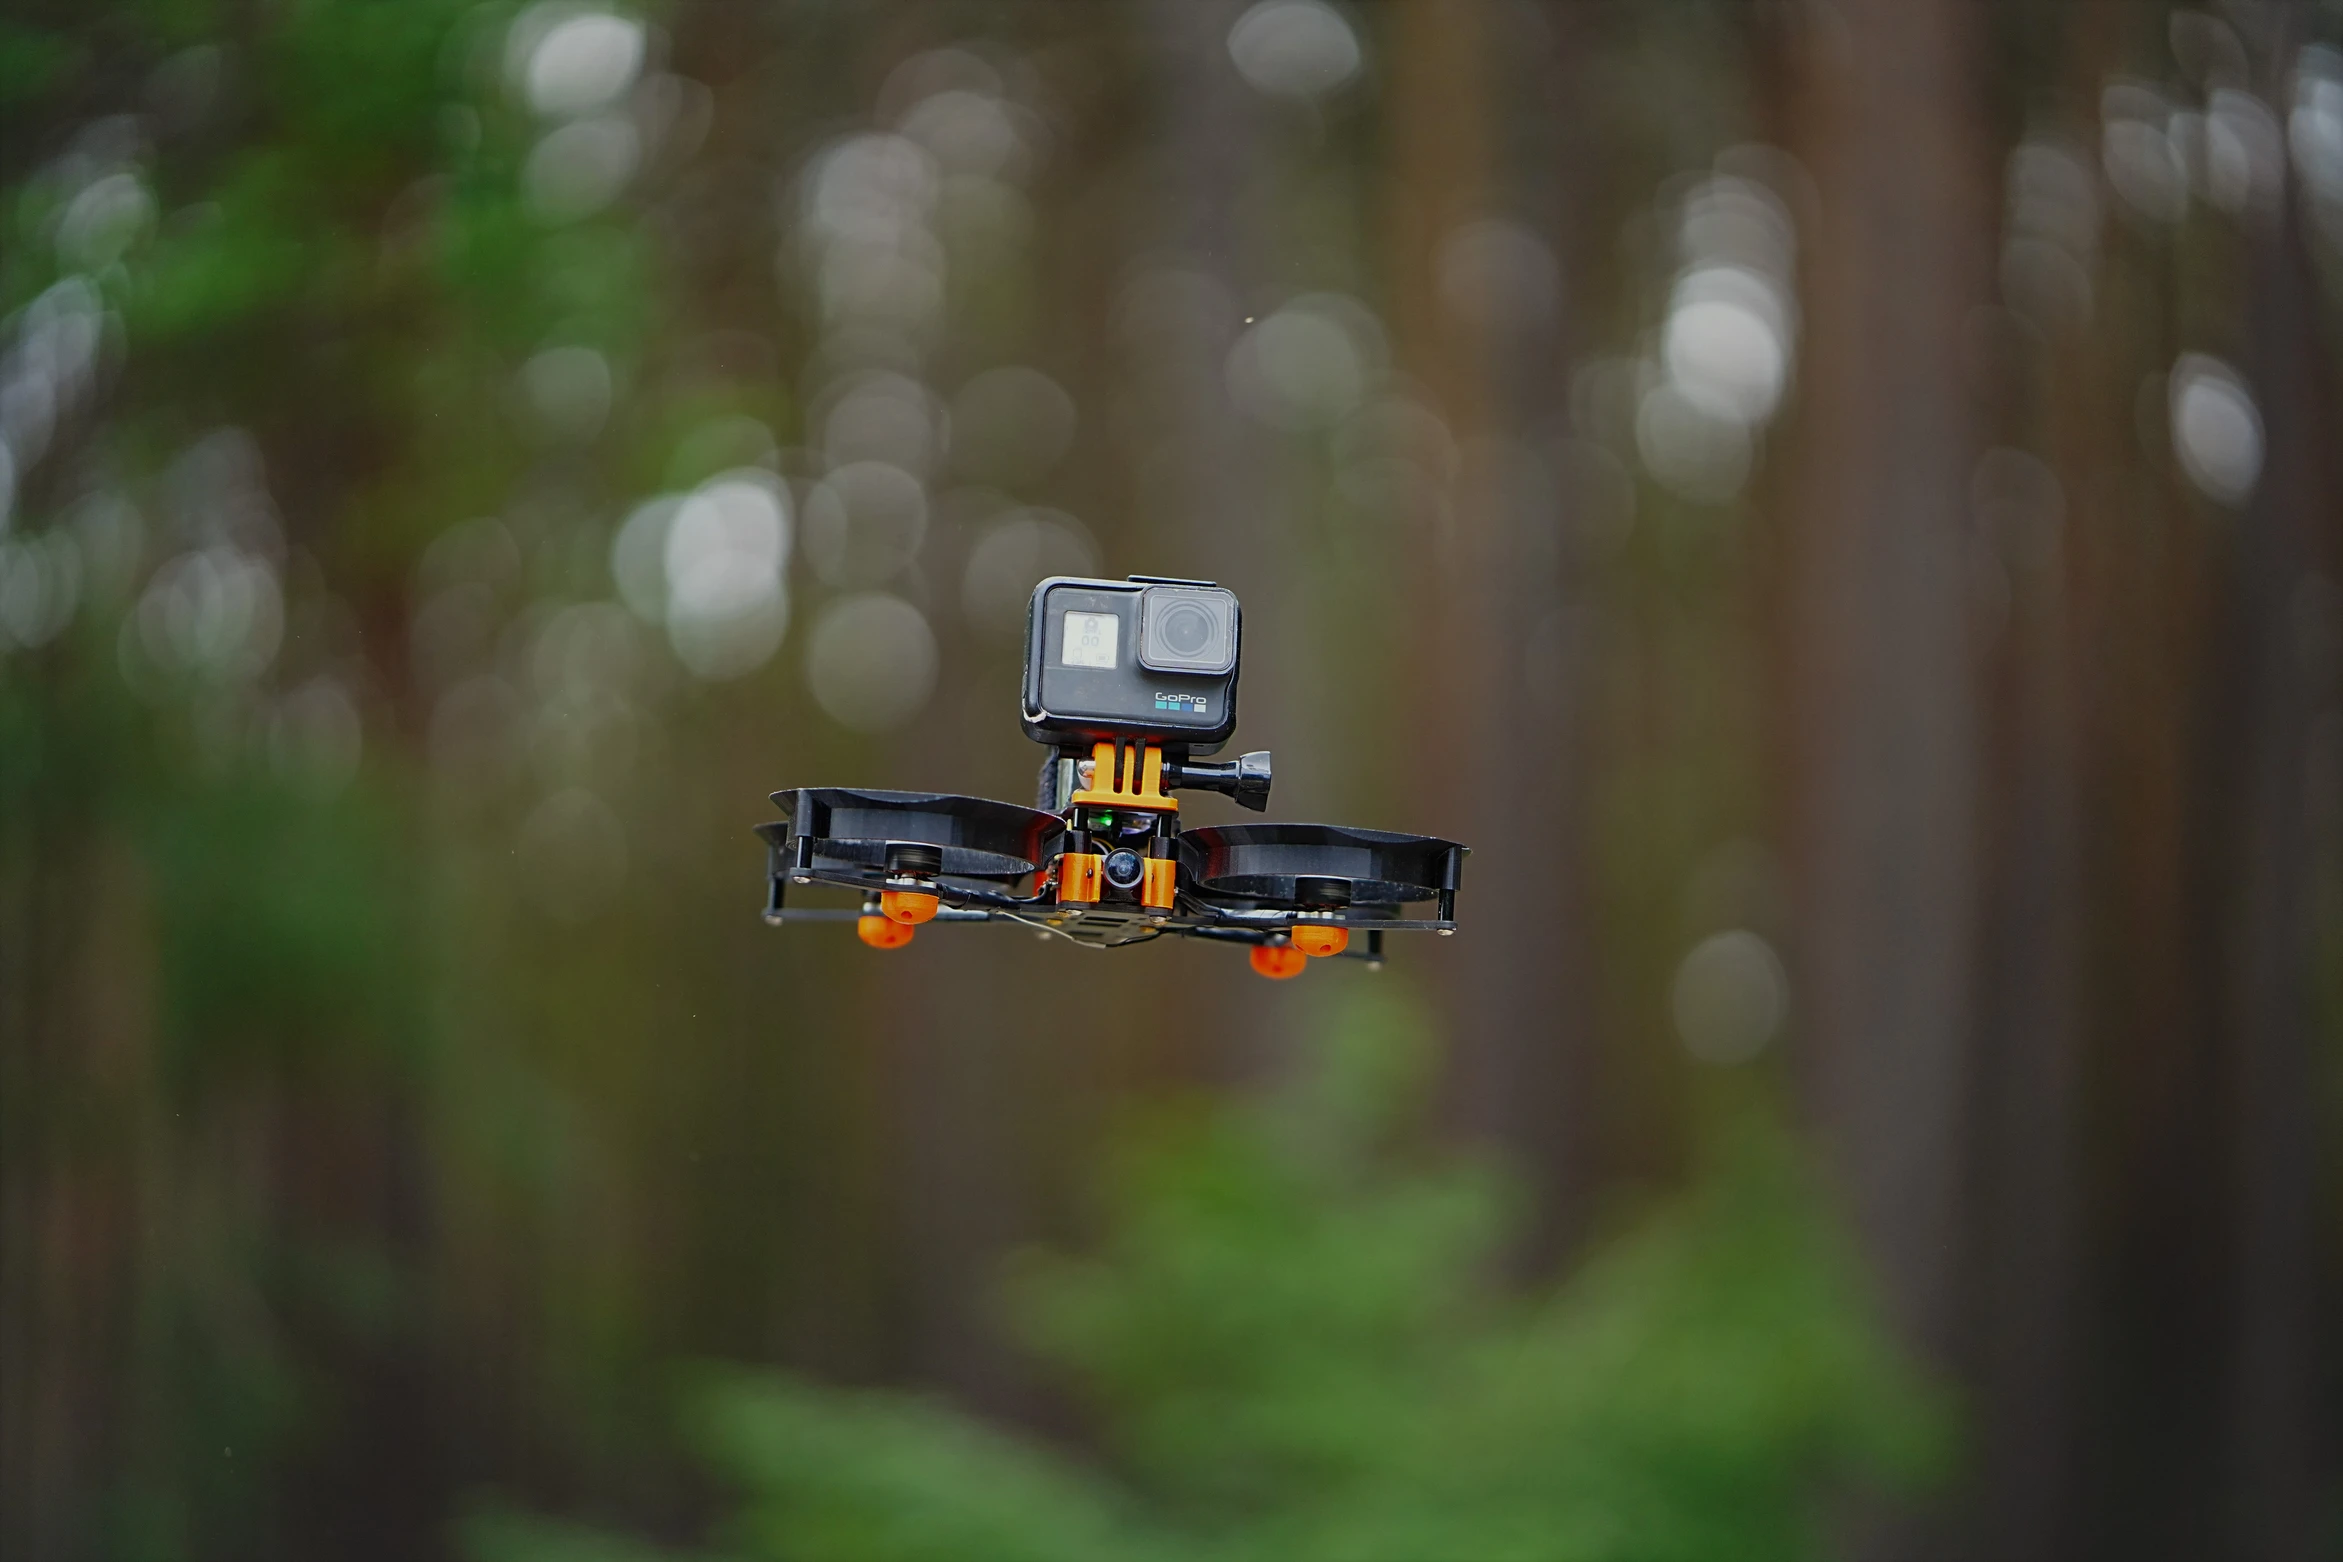 Cinewhoop with orange ducts and a mounted GoPro flying in the air